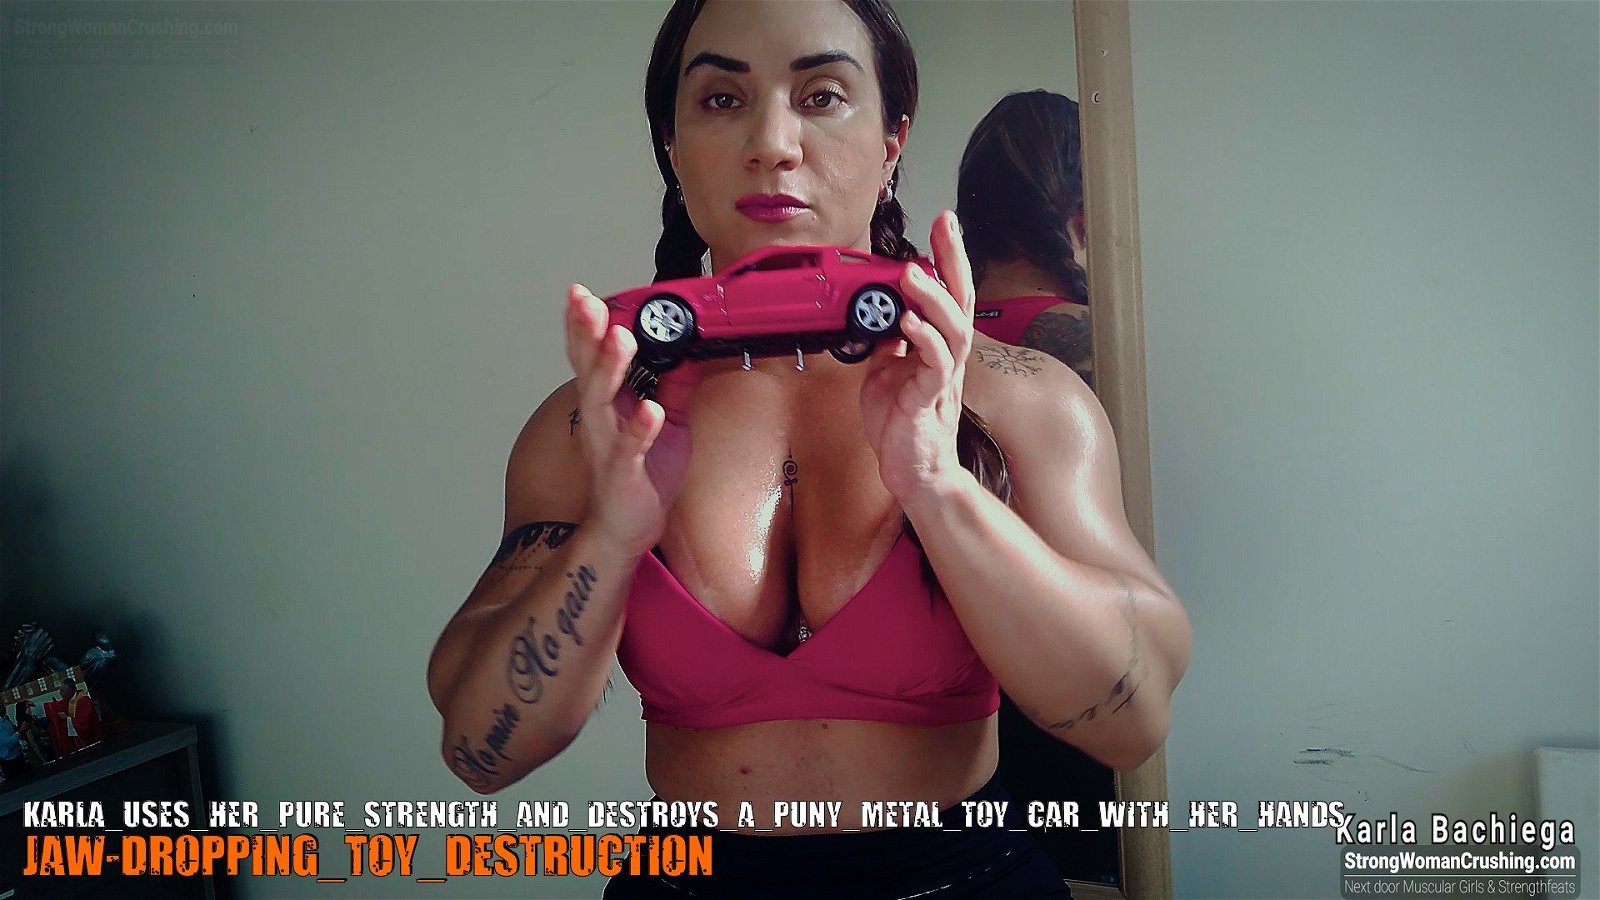 Photo by MusclegirlStrength with the username @MusclegirlStrength, who is a brand user,  September 7, 2023 at 2:32 PM and the text says '💪🔥 Watch Karla use her pure strength to destroy a puny metal toy car with her hands! 🚗 Unlock exclusive content with a membership to www.strongwomancrushing.com 🤩 #StrongWomanCrushing #PowerfulWomen #FemaleStrength #FemaleEmpowerment #WomenInAction'